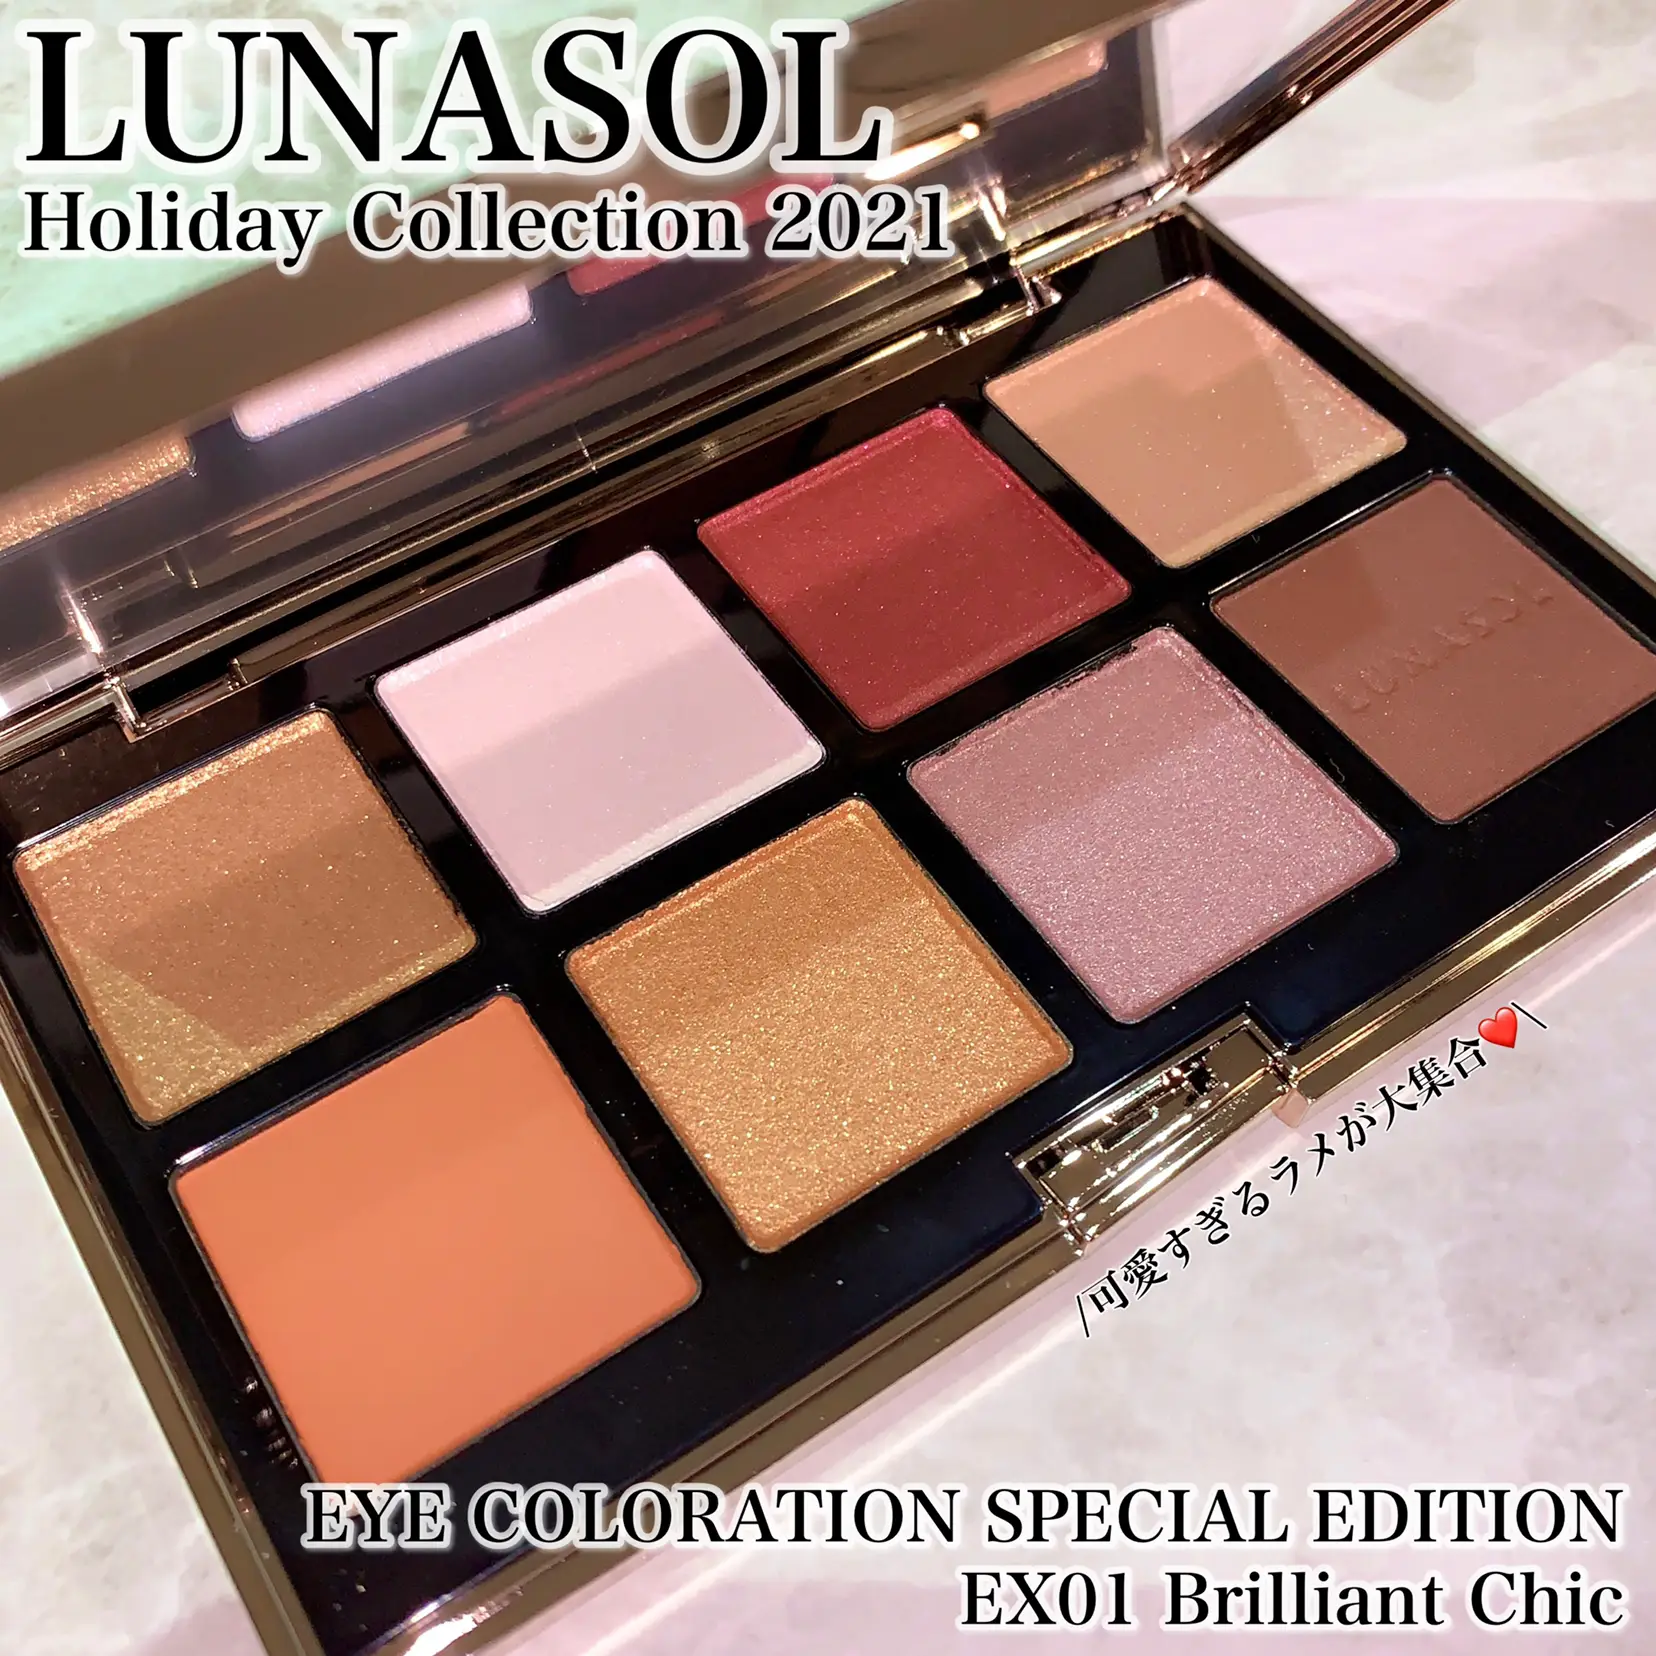 The image of Lunasol has changed!! Holiday limited eye coloring